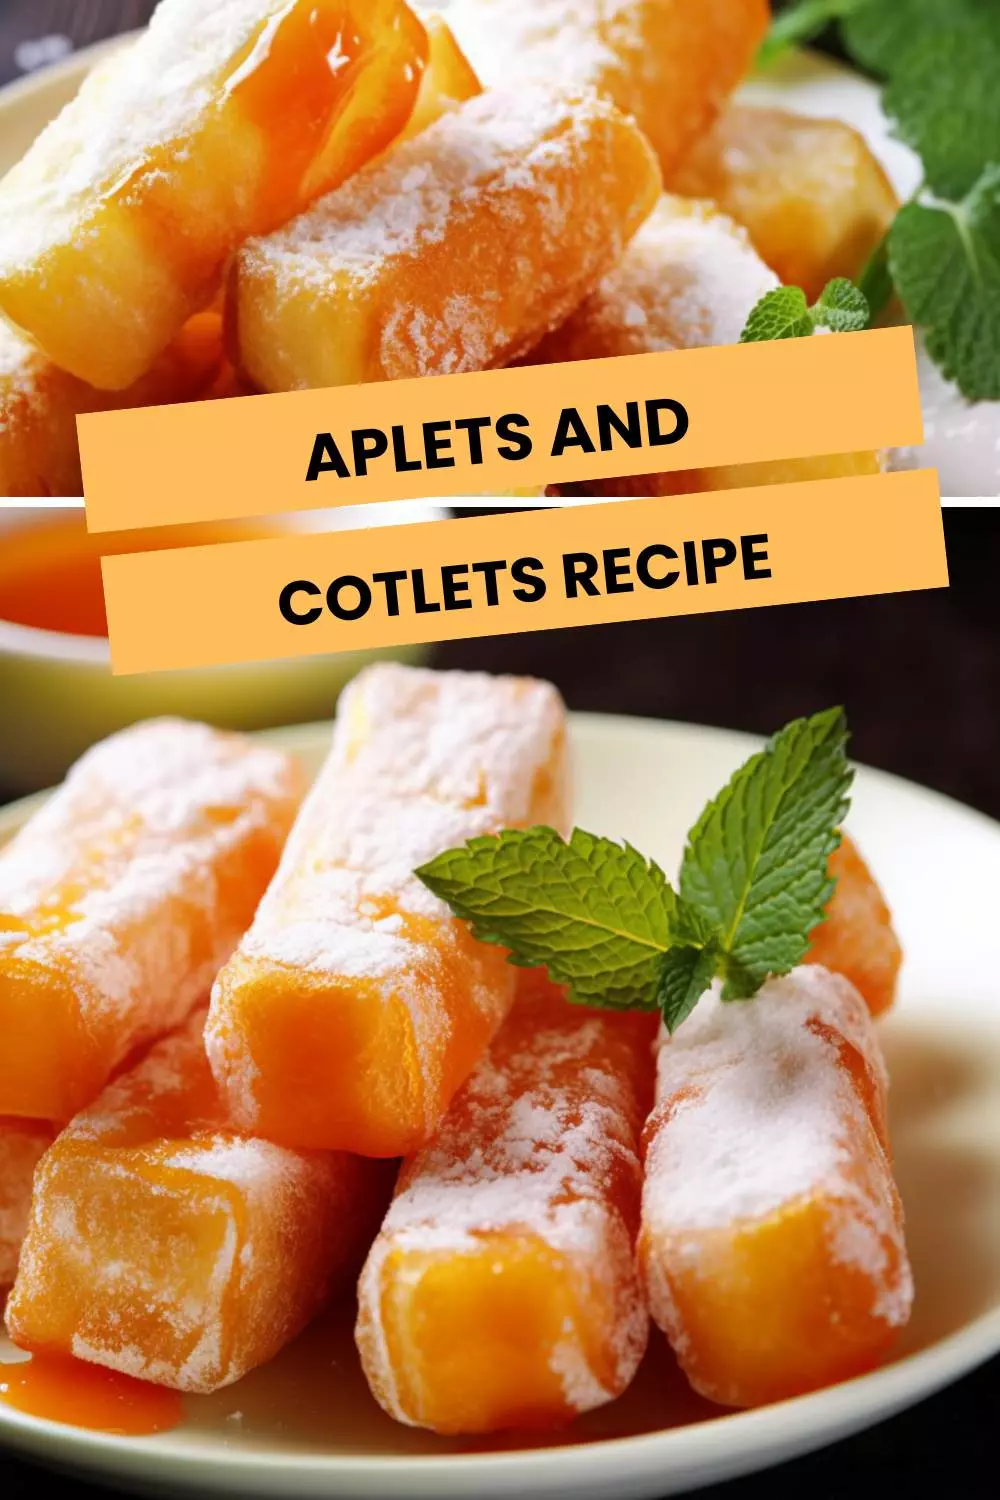 aplets and cotlets recipe